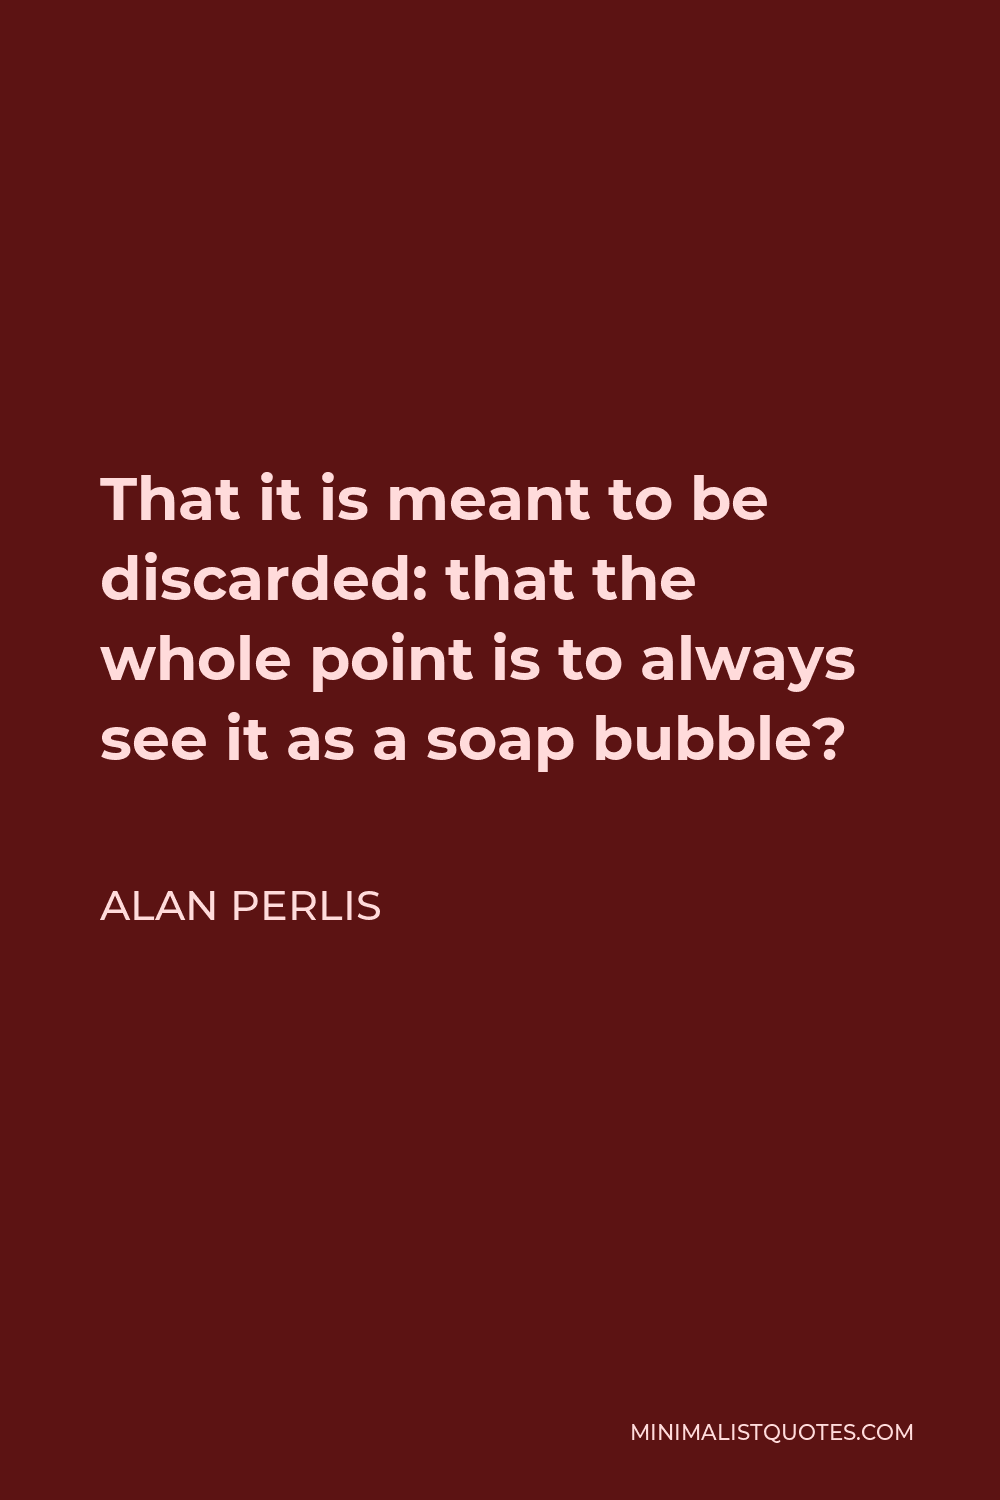 Alan Perlis Quote - That it is meant to be discarded: that the whole point is to always see it as a soap bubble?